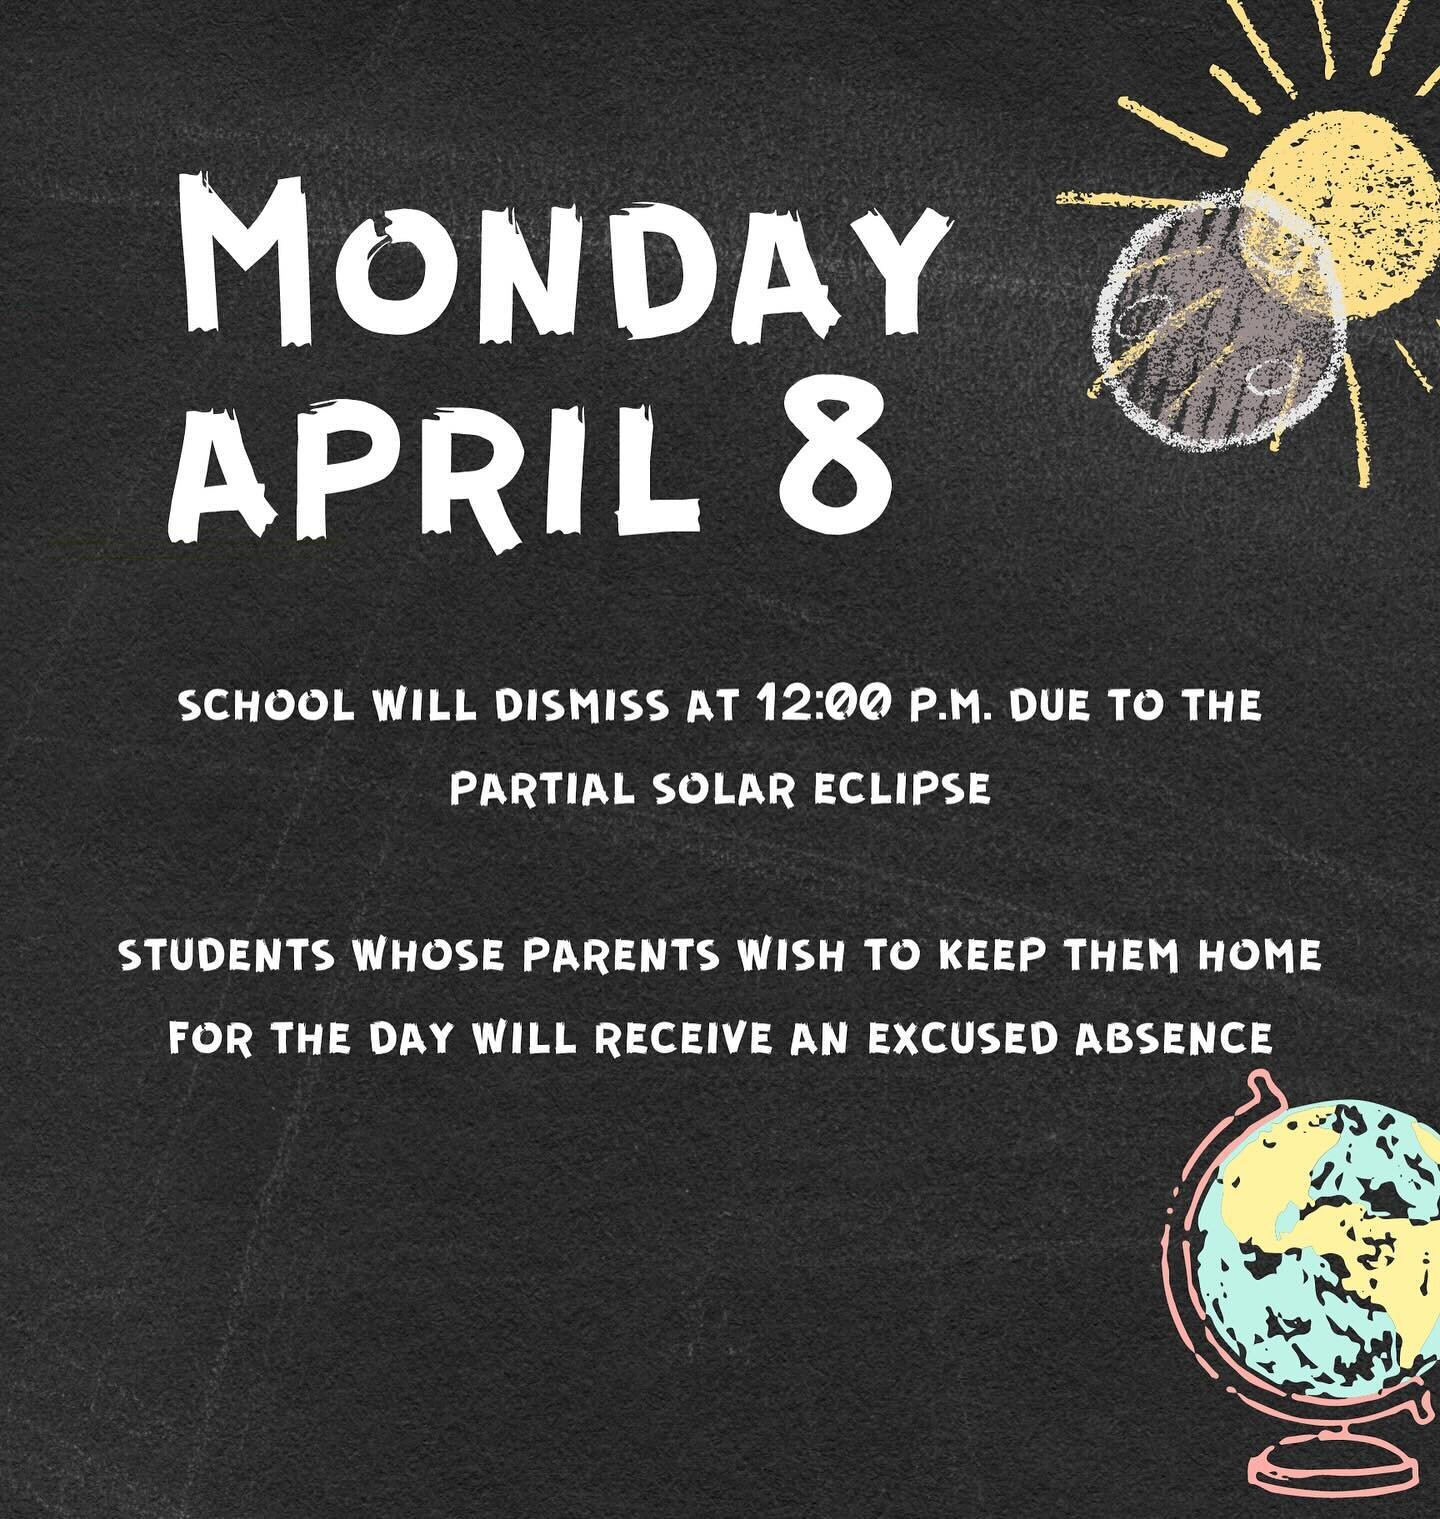 Global HS parents and students: please plan ahead for Monday!